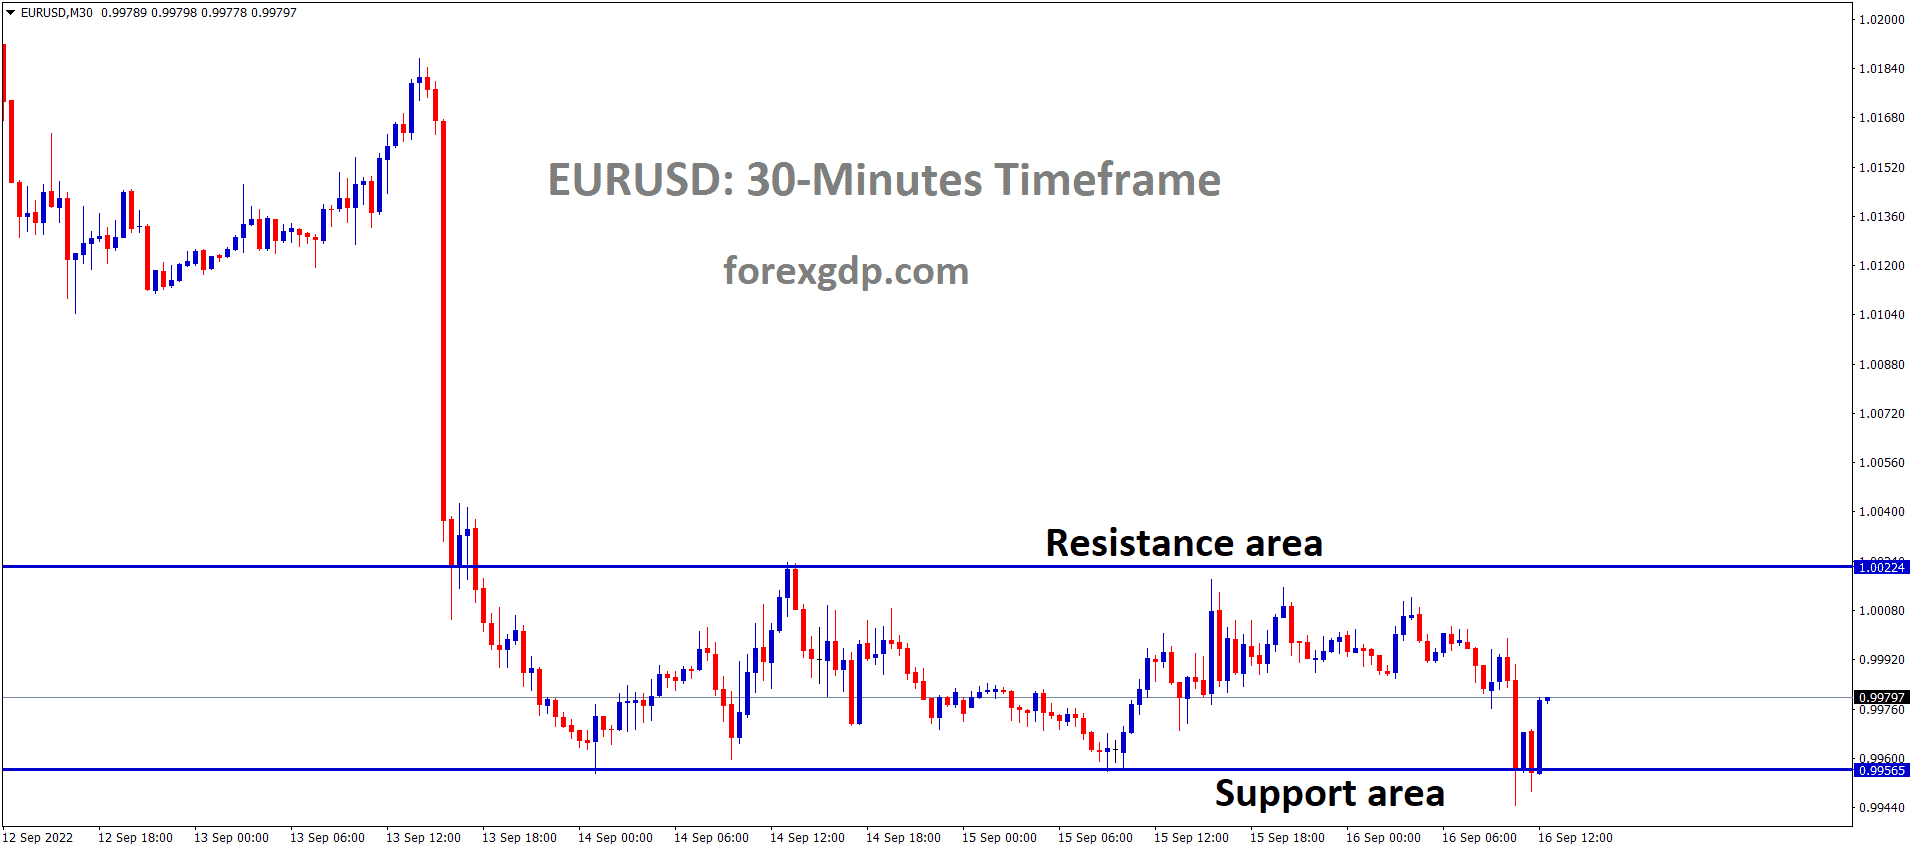 EURUSD is moving in the Box pattern and the market has rebounded from the horizontal support area of the pattern